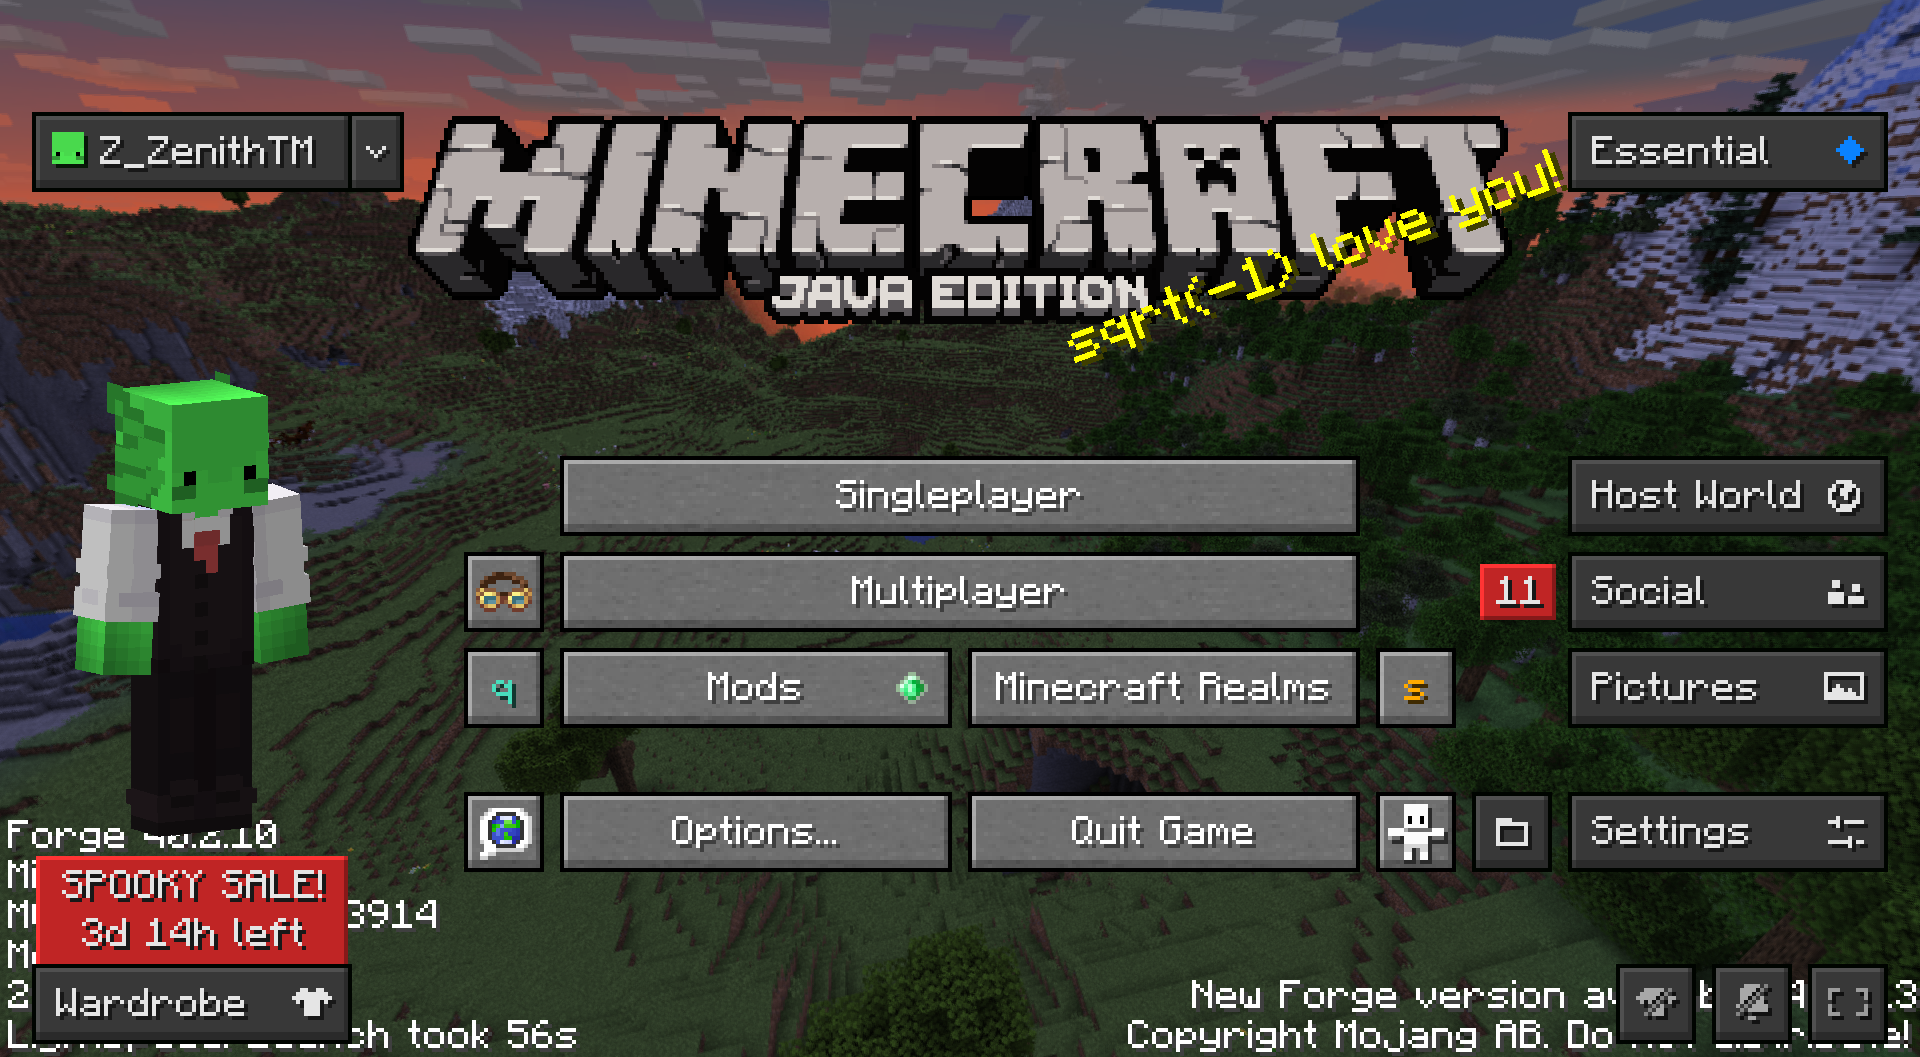 This is the title screen when you open up the mod pack!